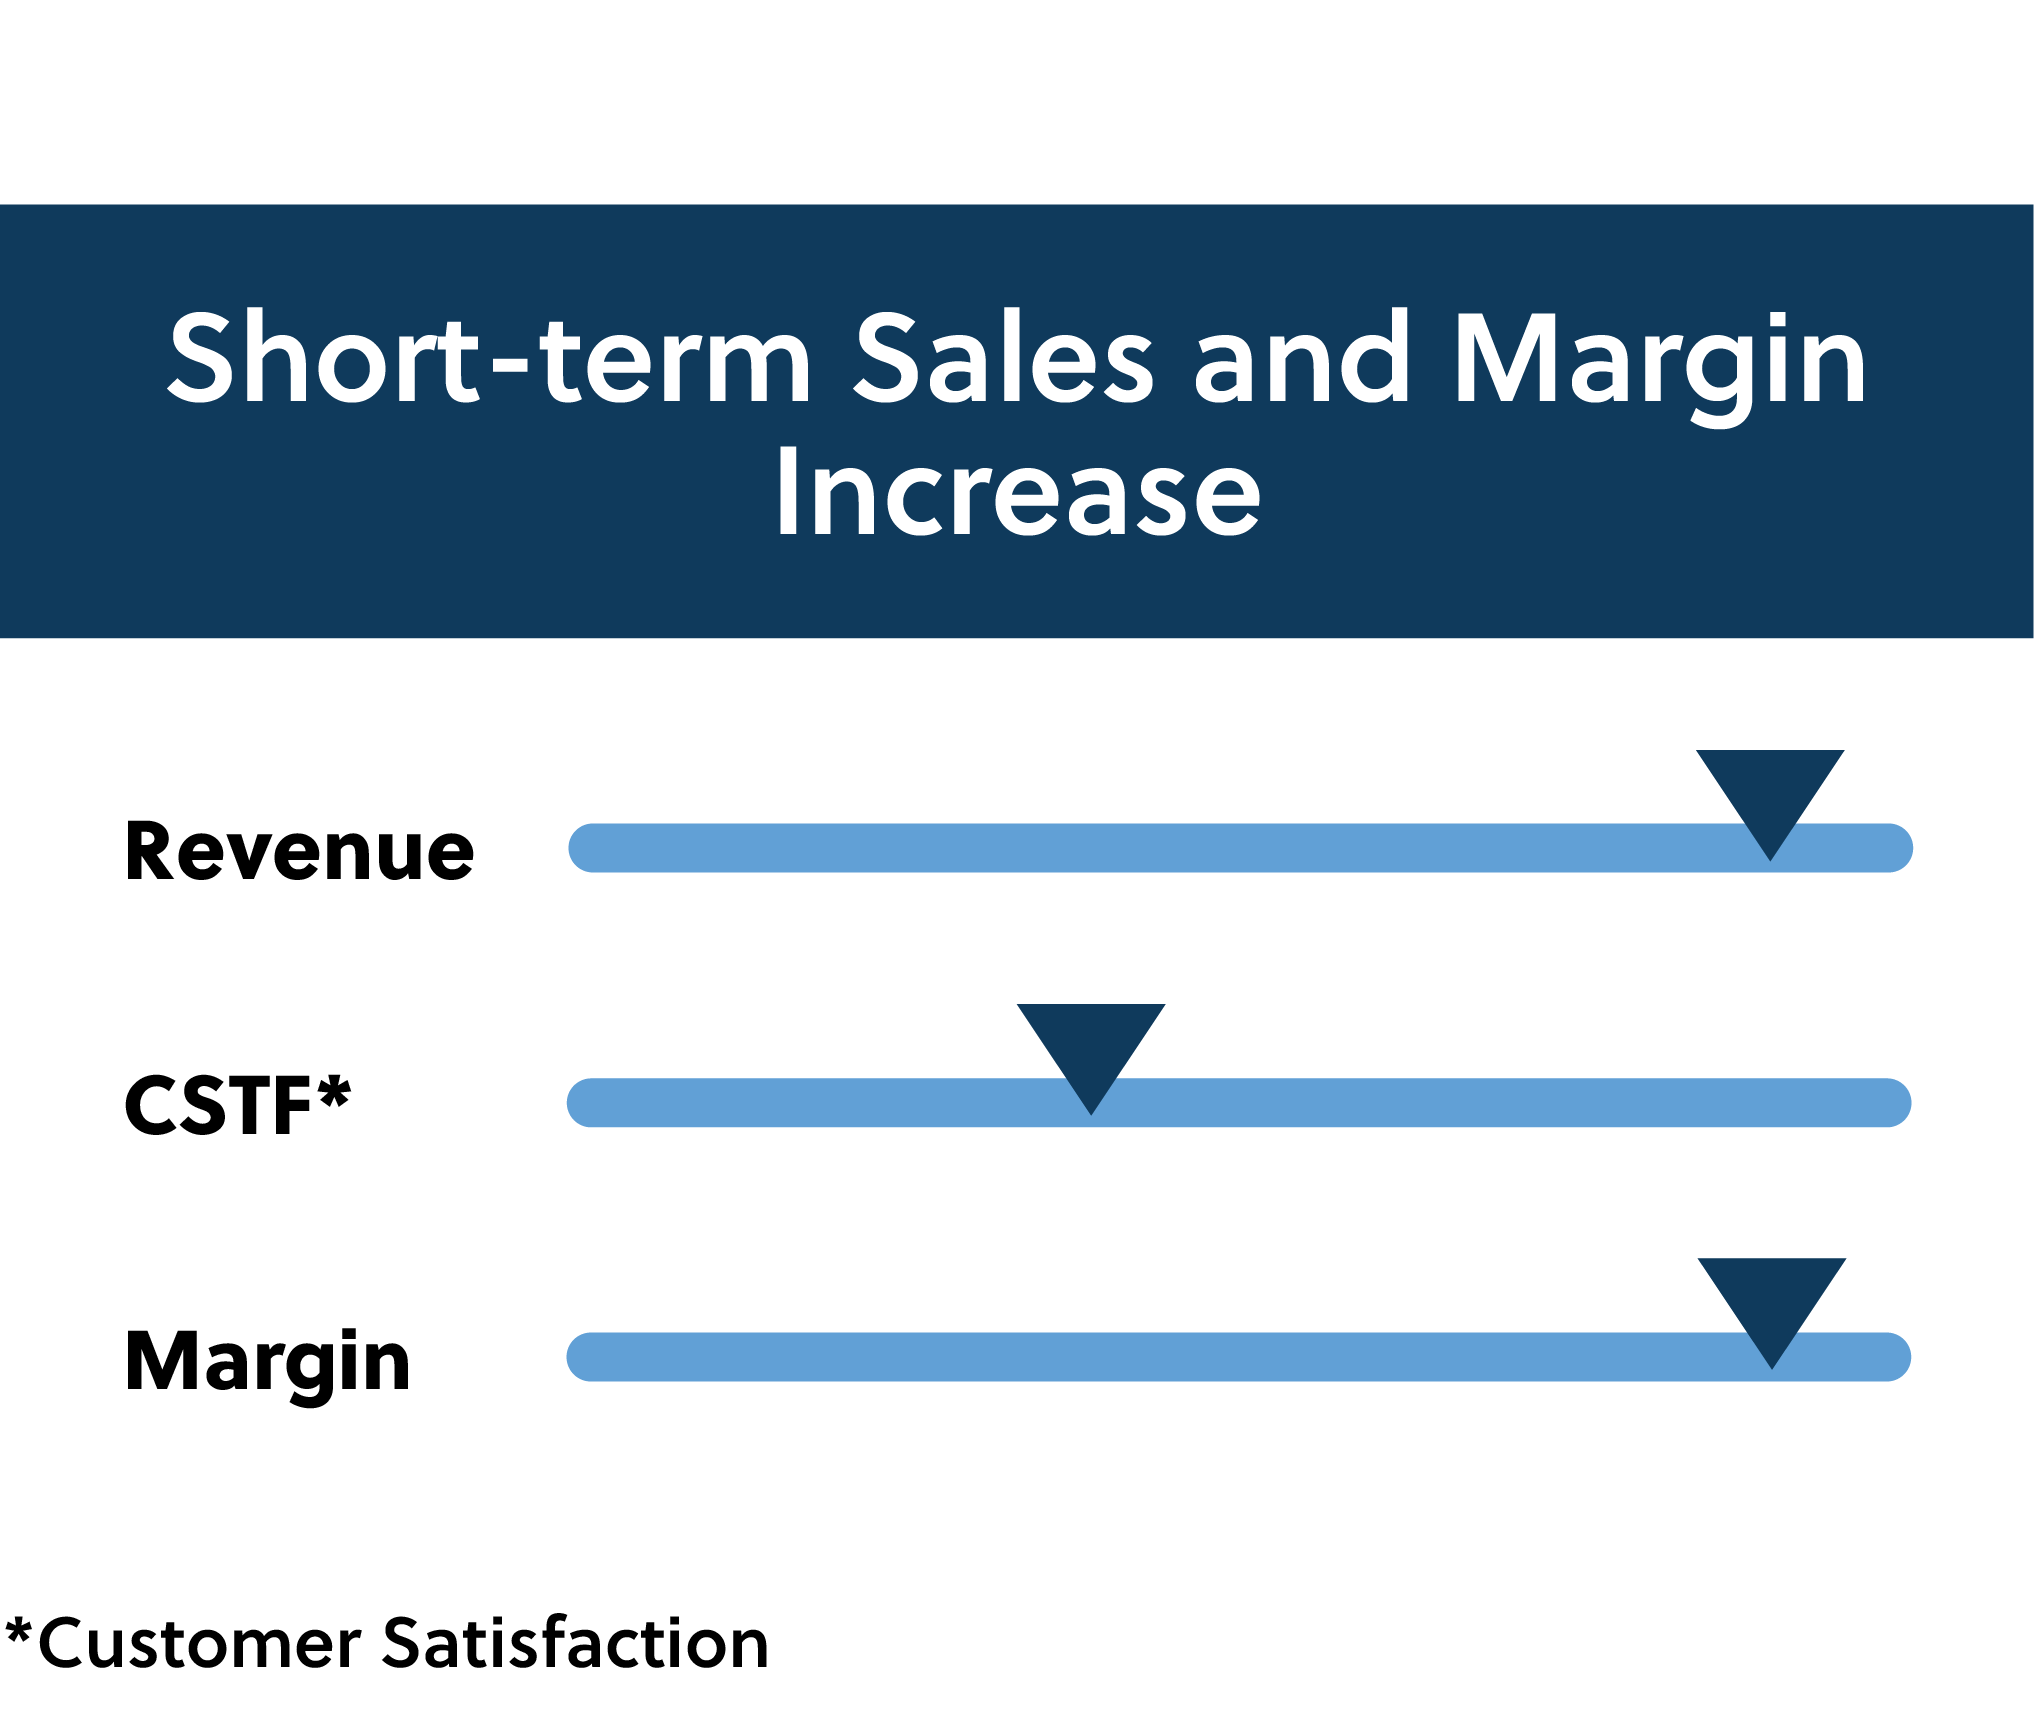 Market-based pricing through increased sales and margins